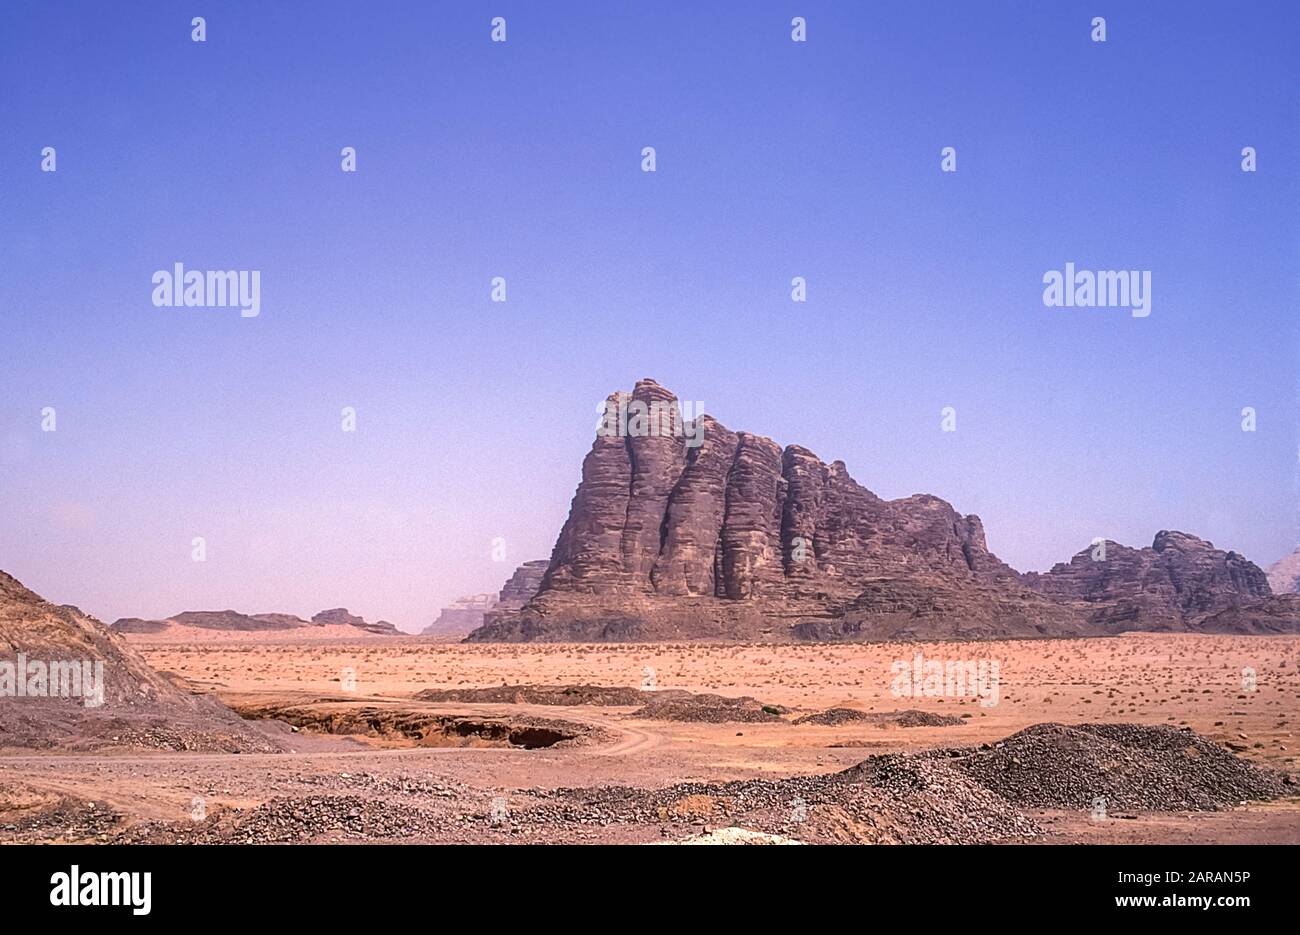 Jordan. Colourful scenes at the UNESCO World Heritage Site of Wadi Rum near the port of Aqaba in southern Jordan looking towards the Seven Pillars of Wisdom mountain associated with Lawrence of Arabia. Stock Photo